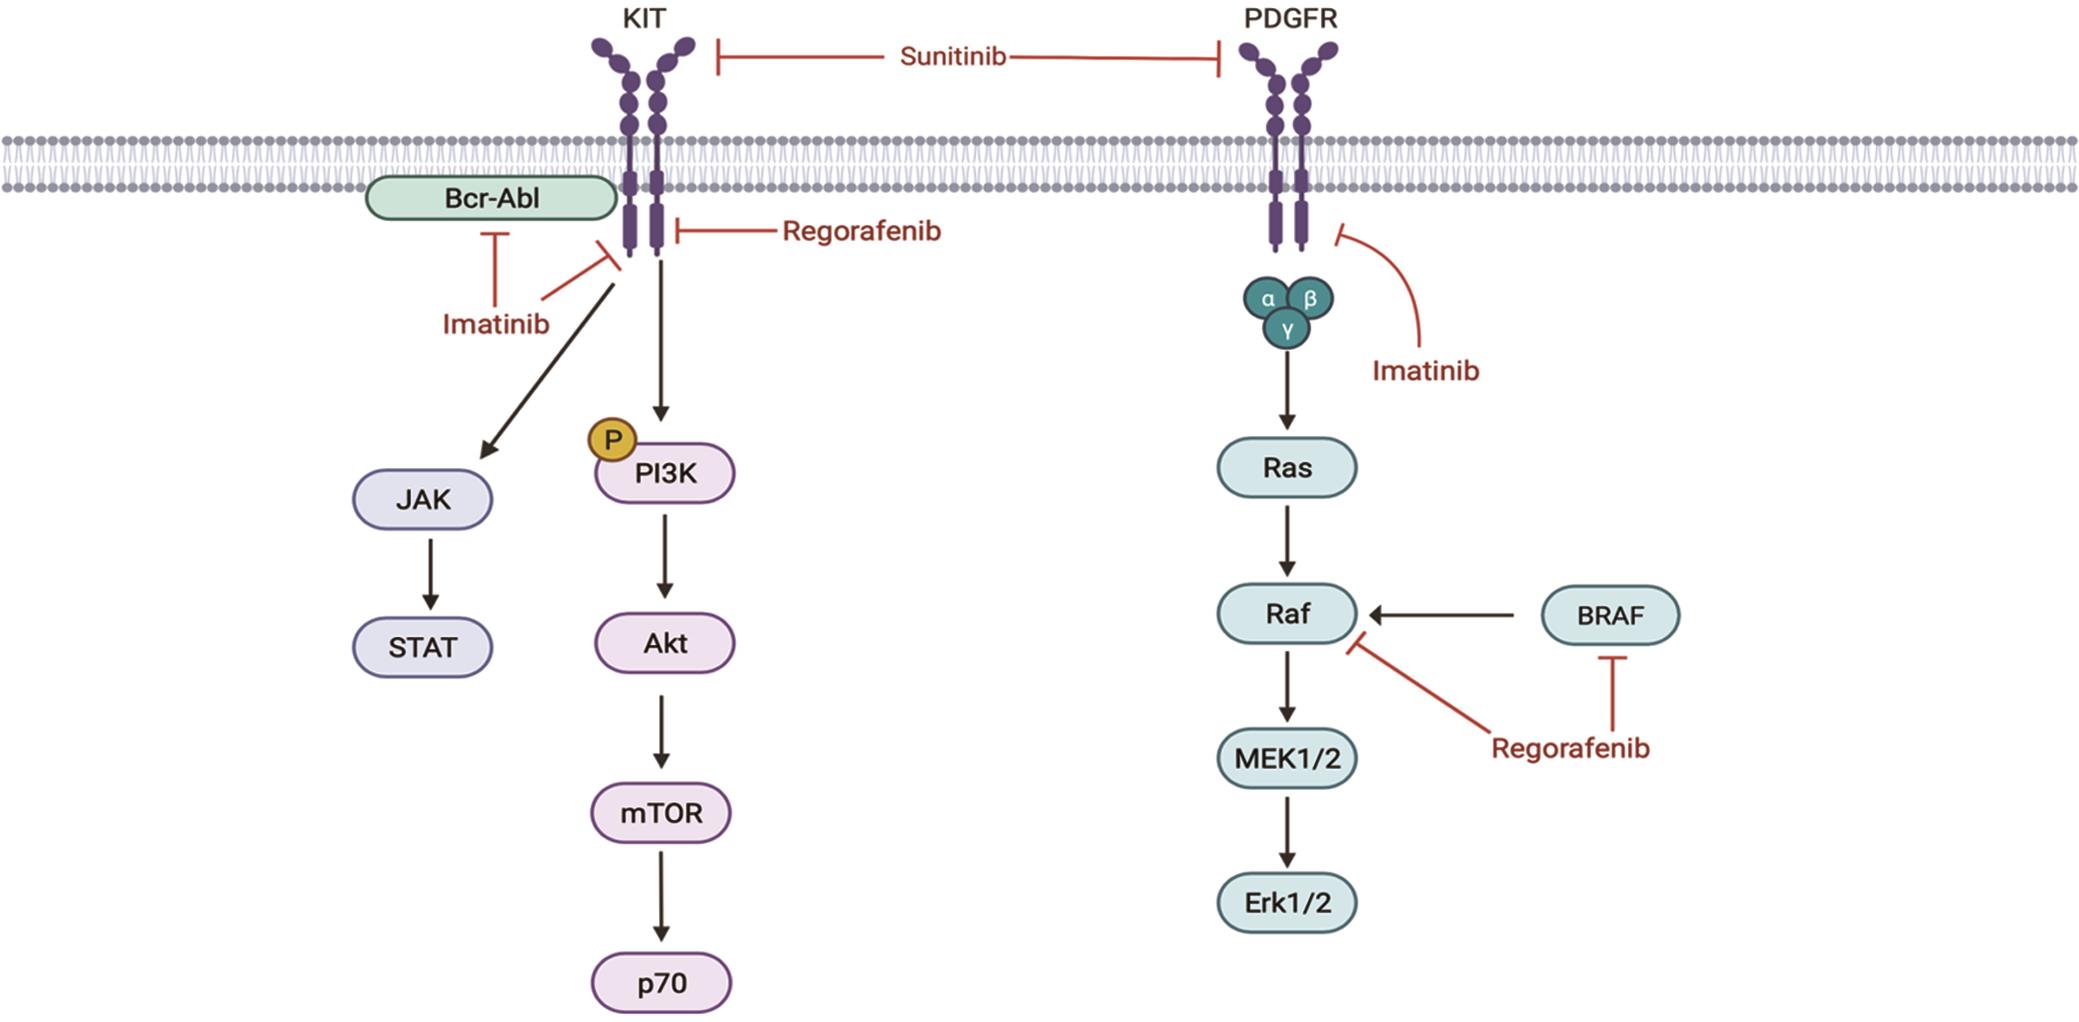 Mechanisms by which of tyrosine kinase inhibitors regulate activation of PHGIST cells.